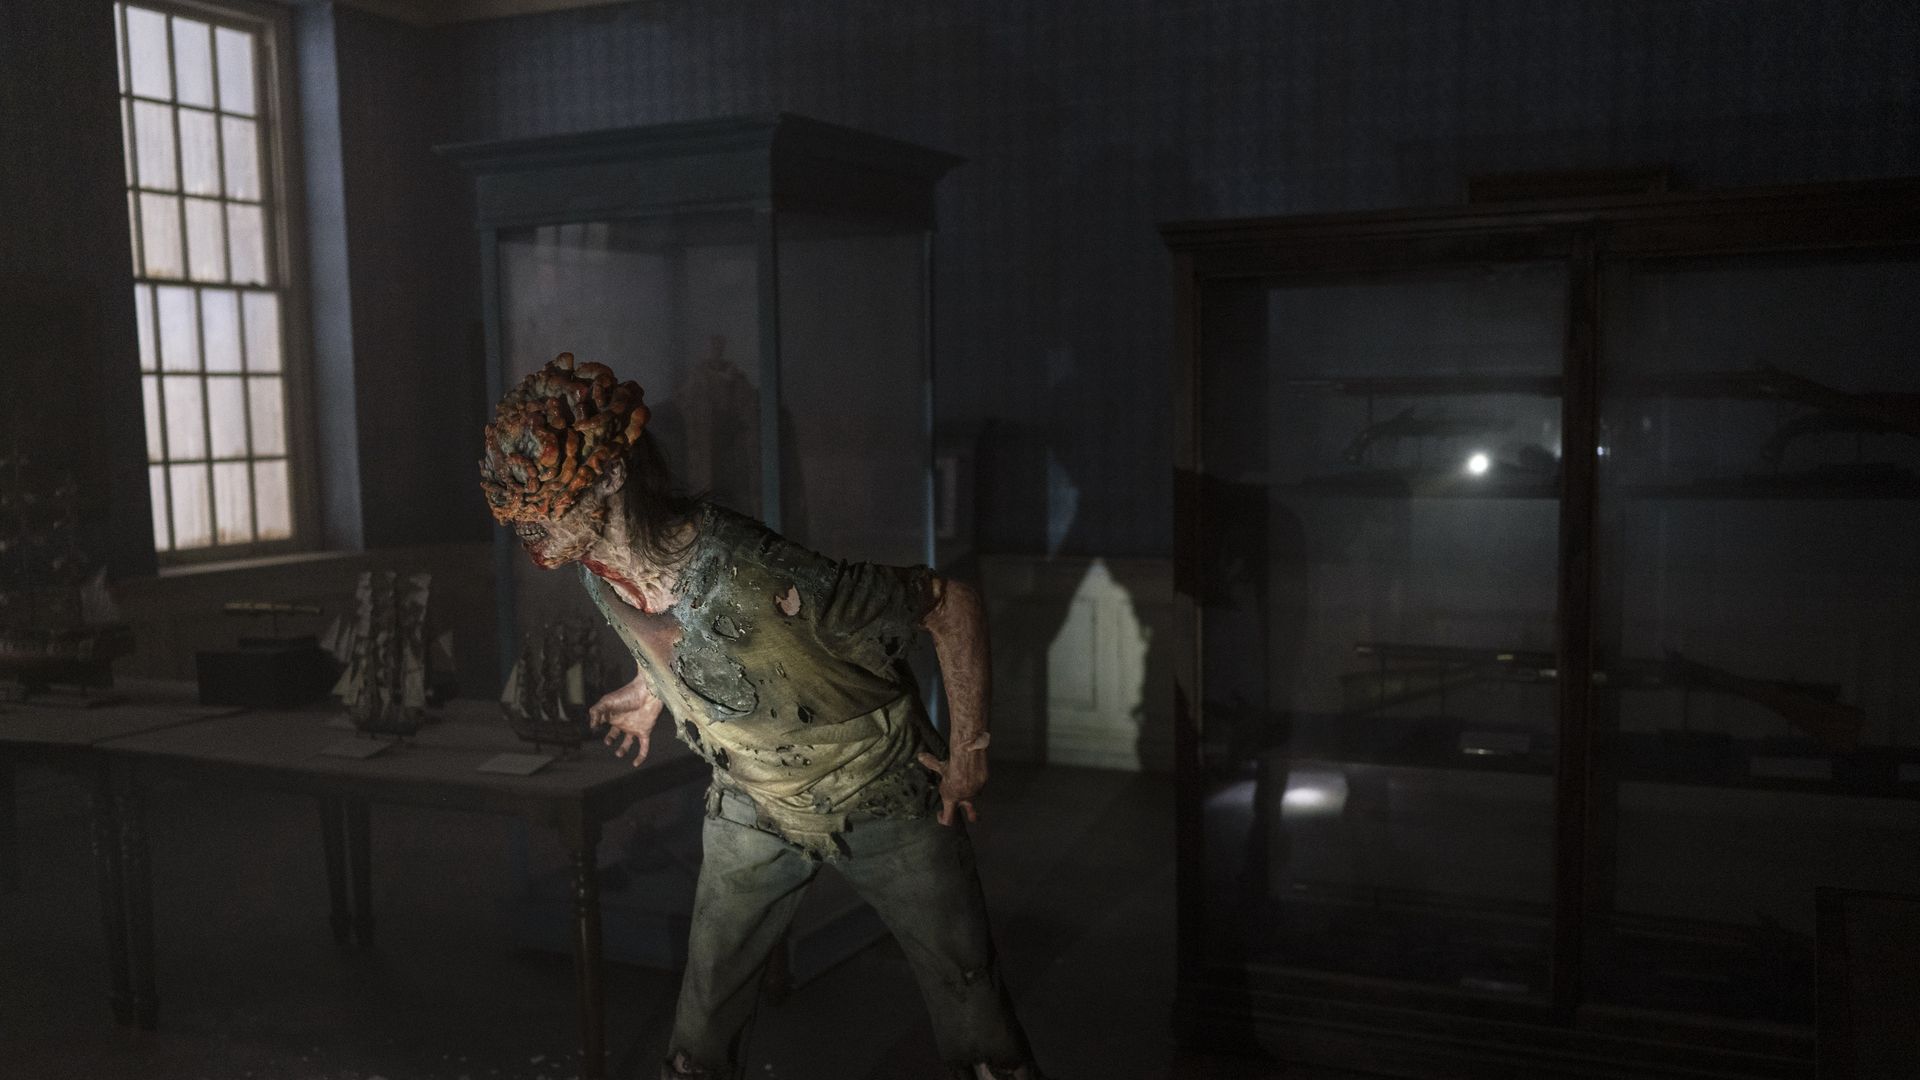 The Last of Us: HBO is turning the video game into a TV series